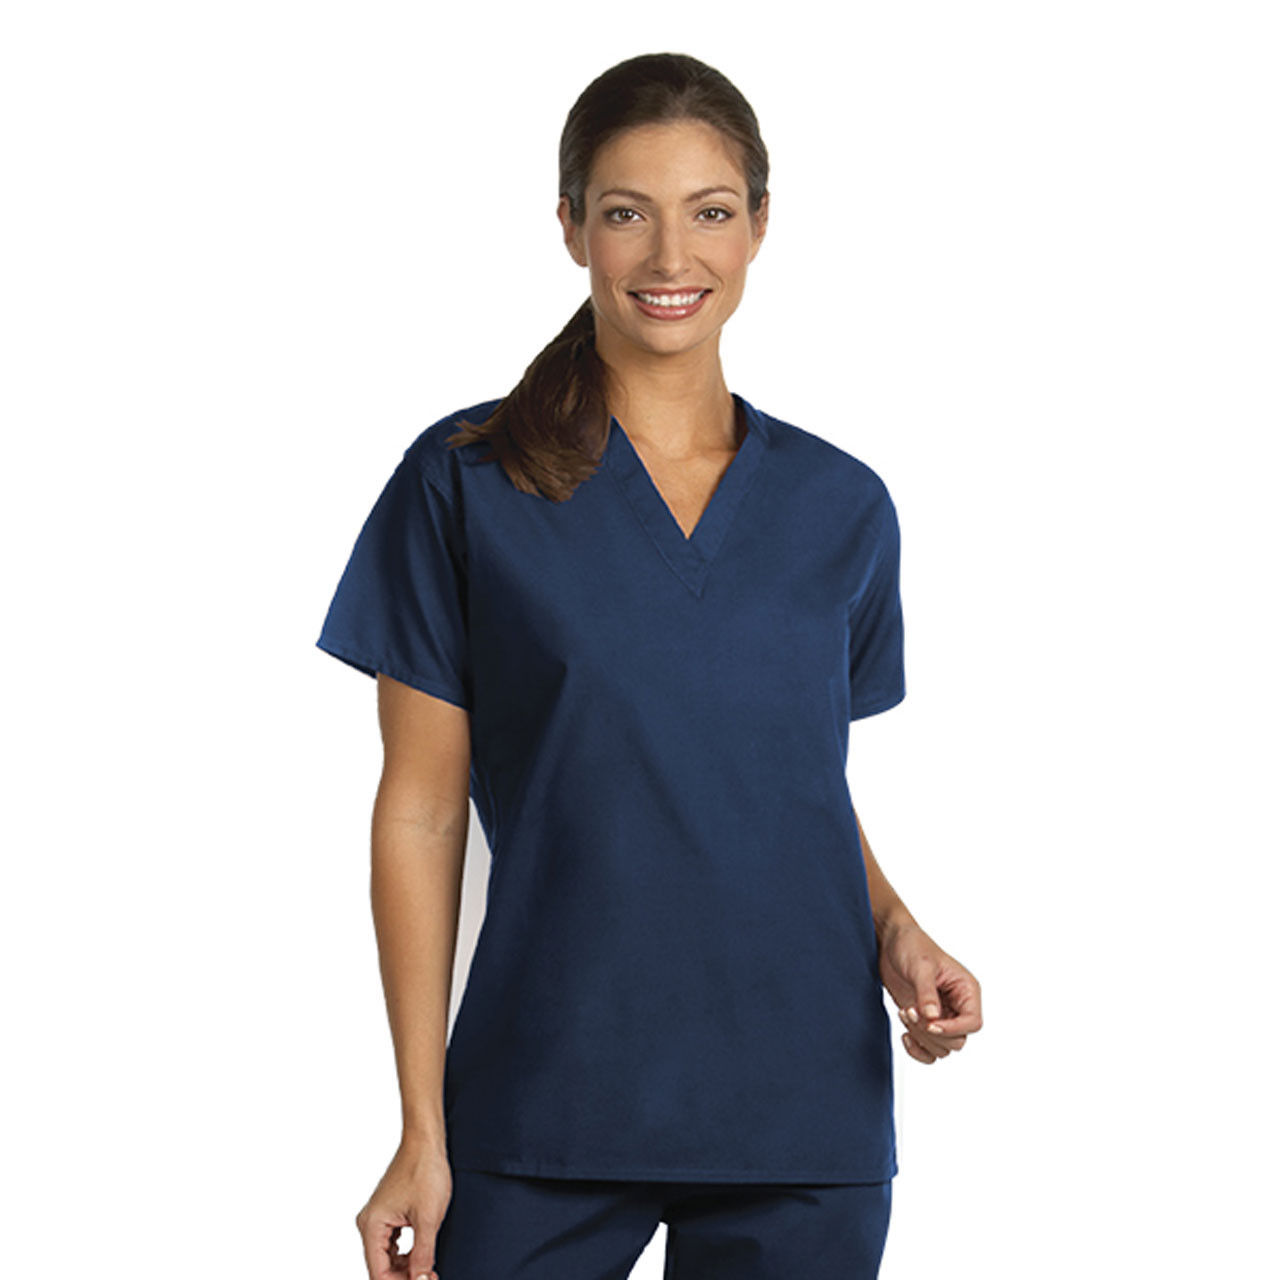 Are there pockets on the scrub set?